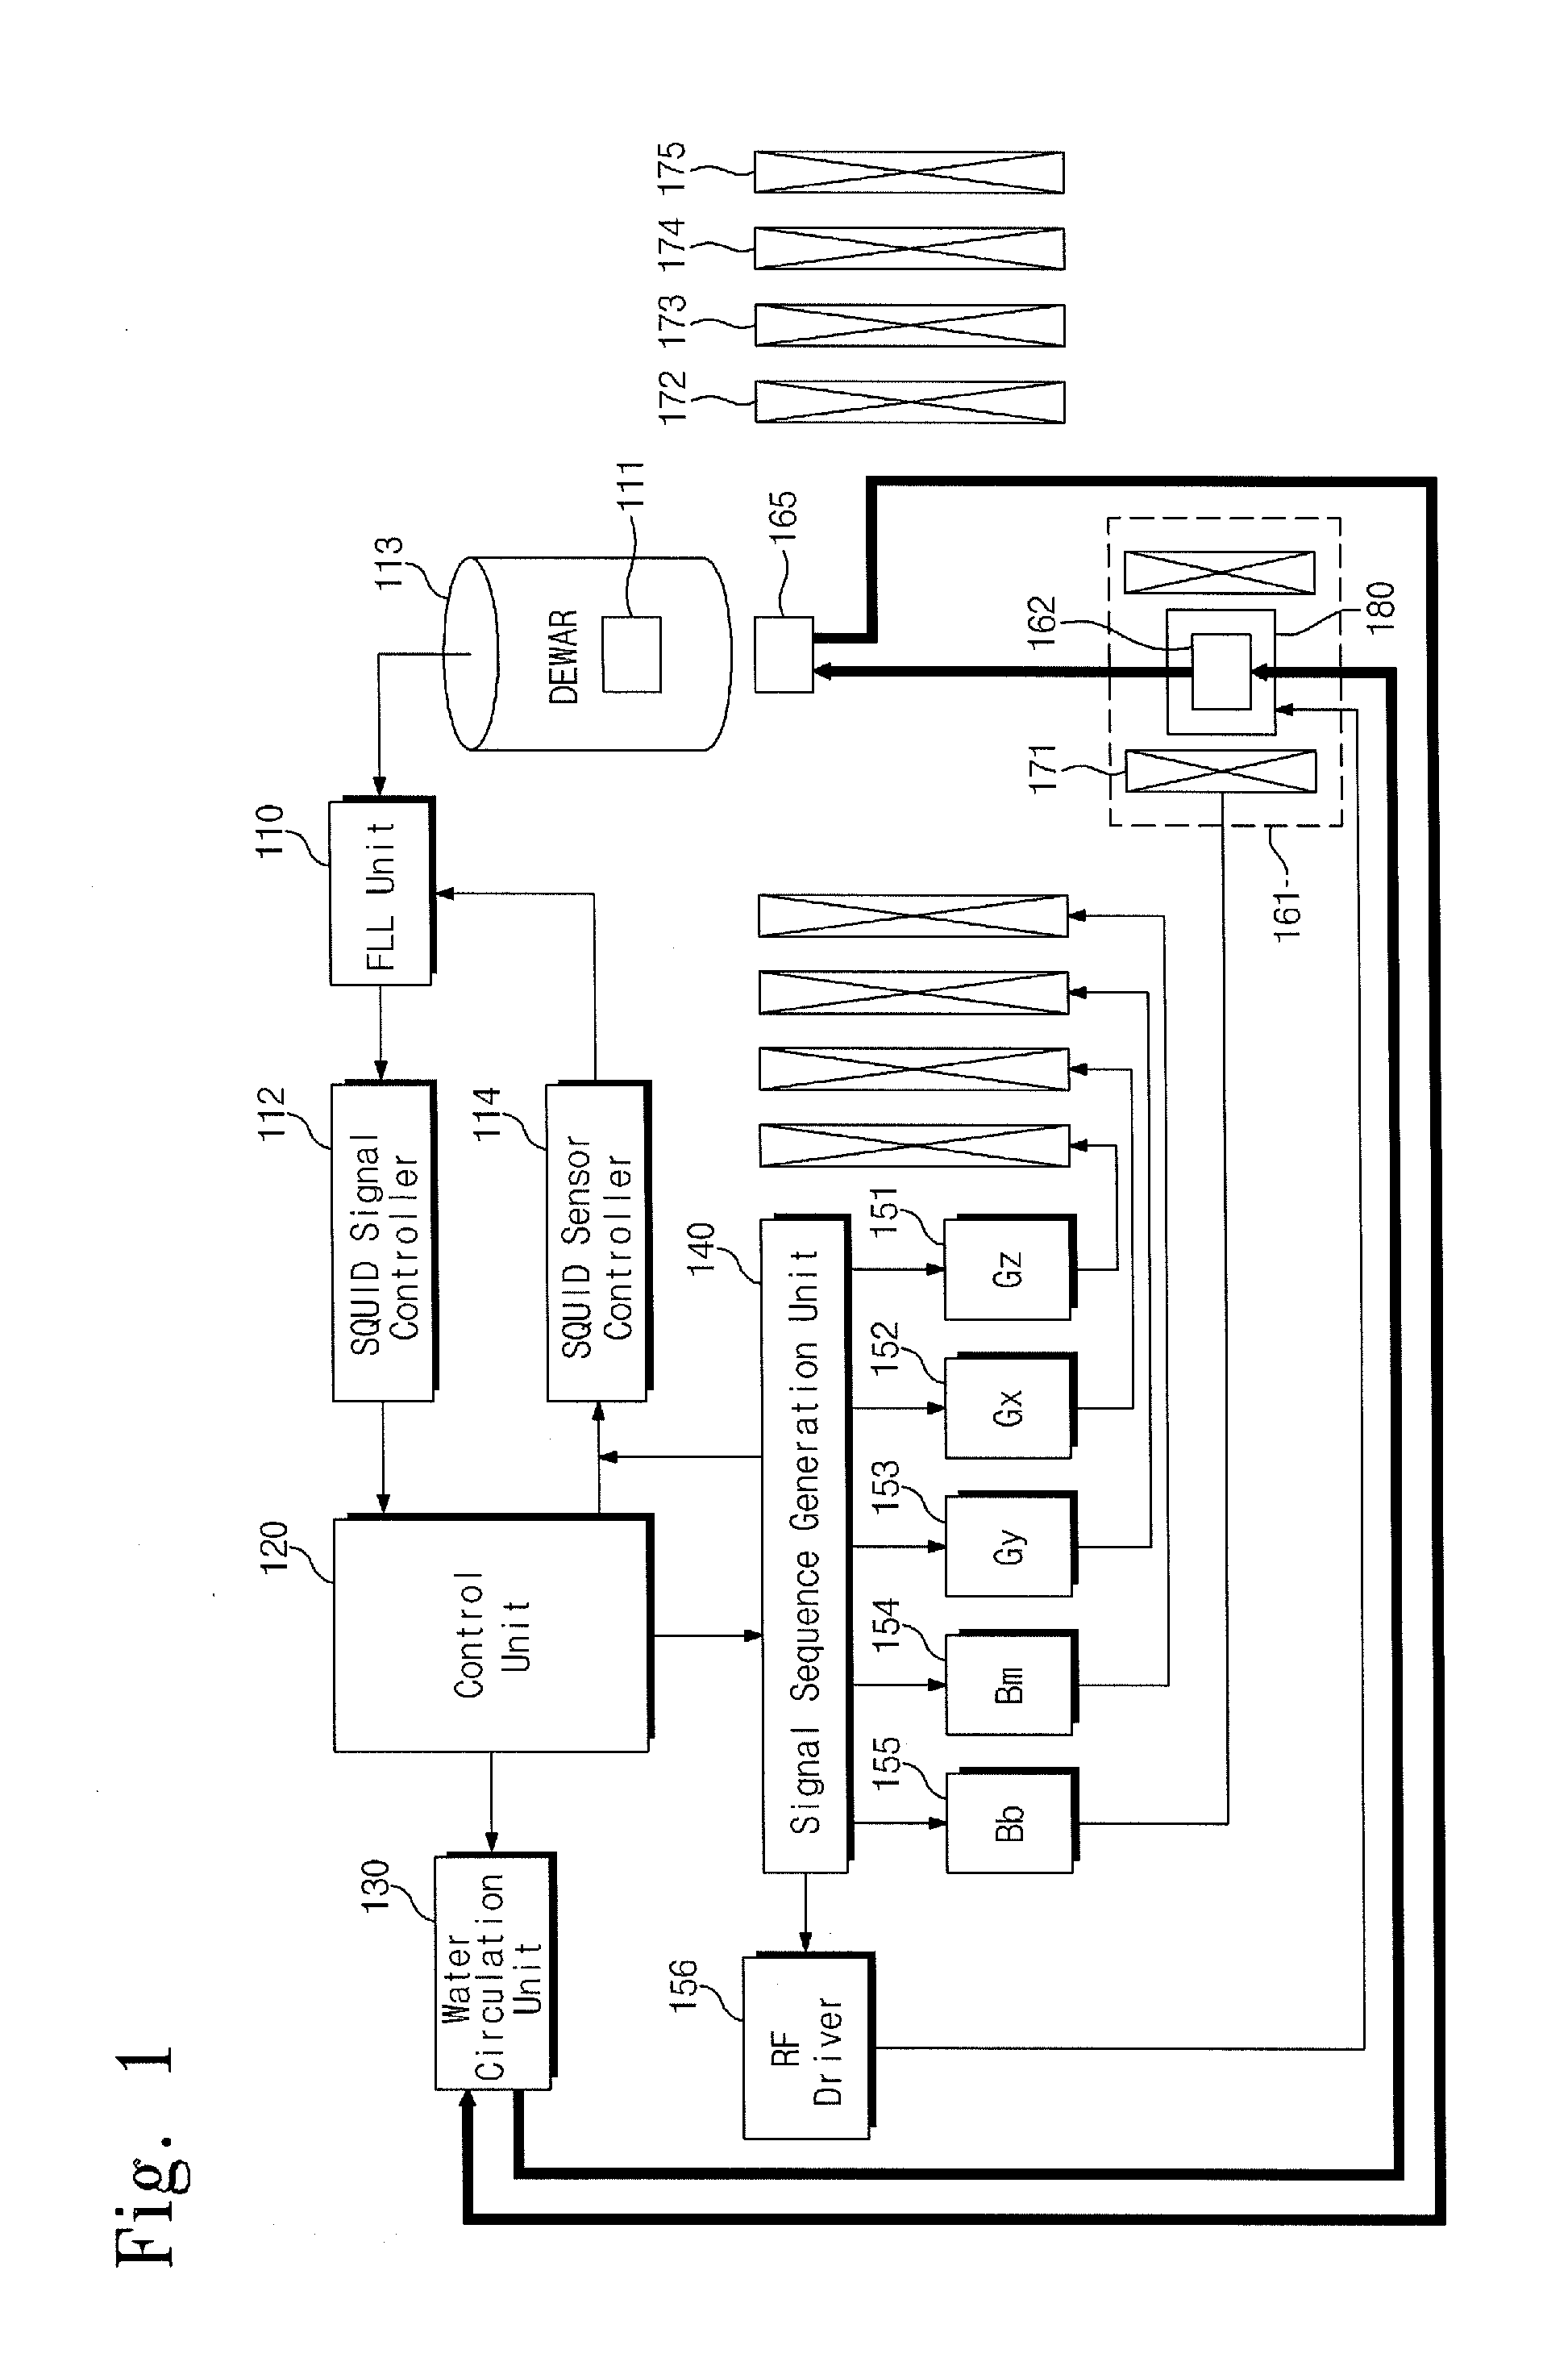 Low-field nuclear magnetic resonance device and low-field nuclear magnetic resonance method